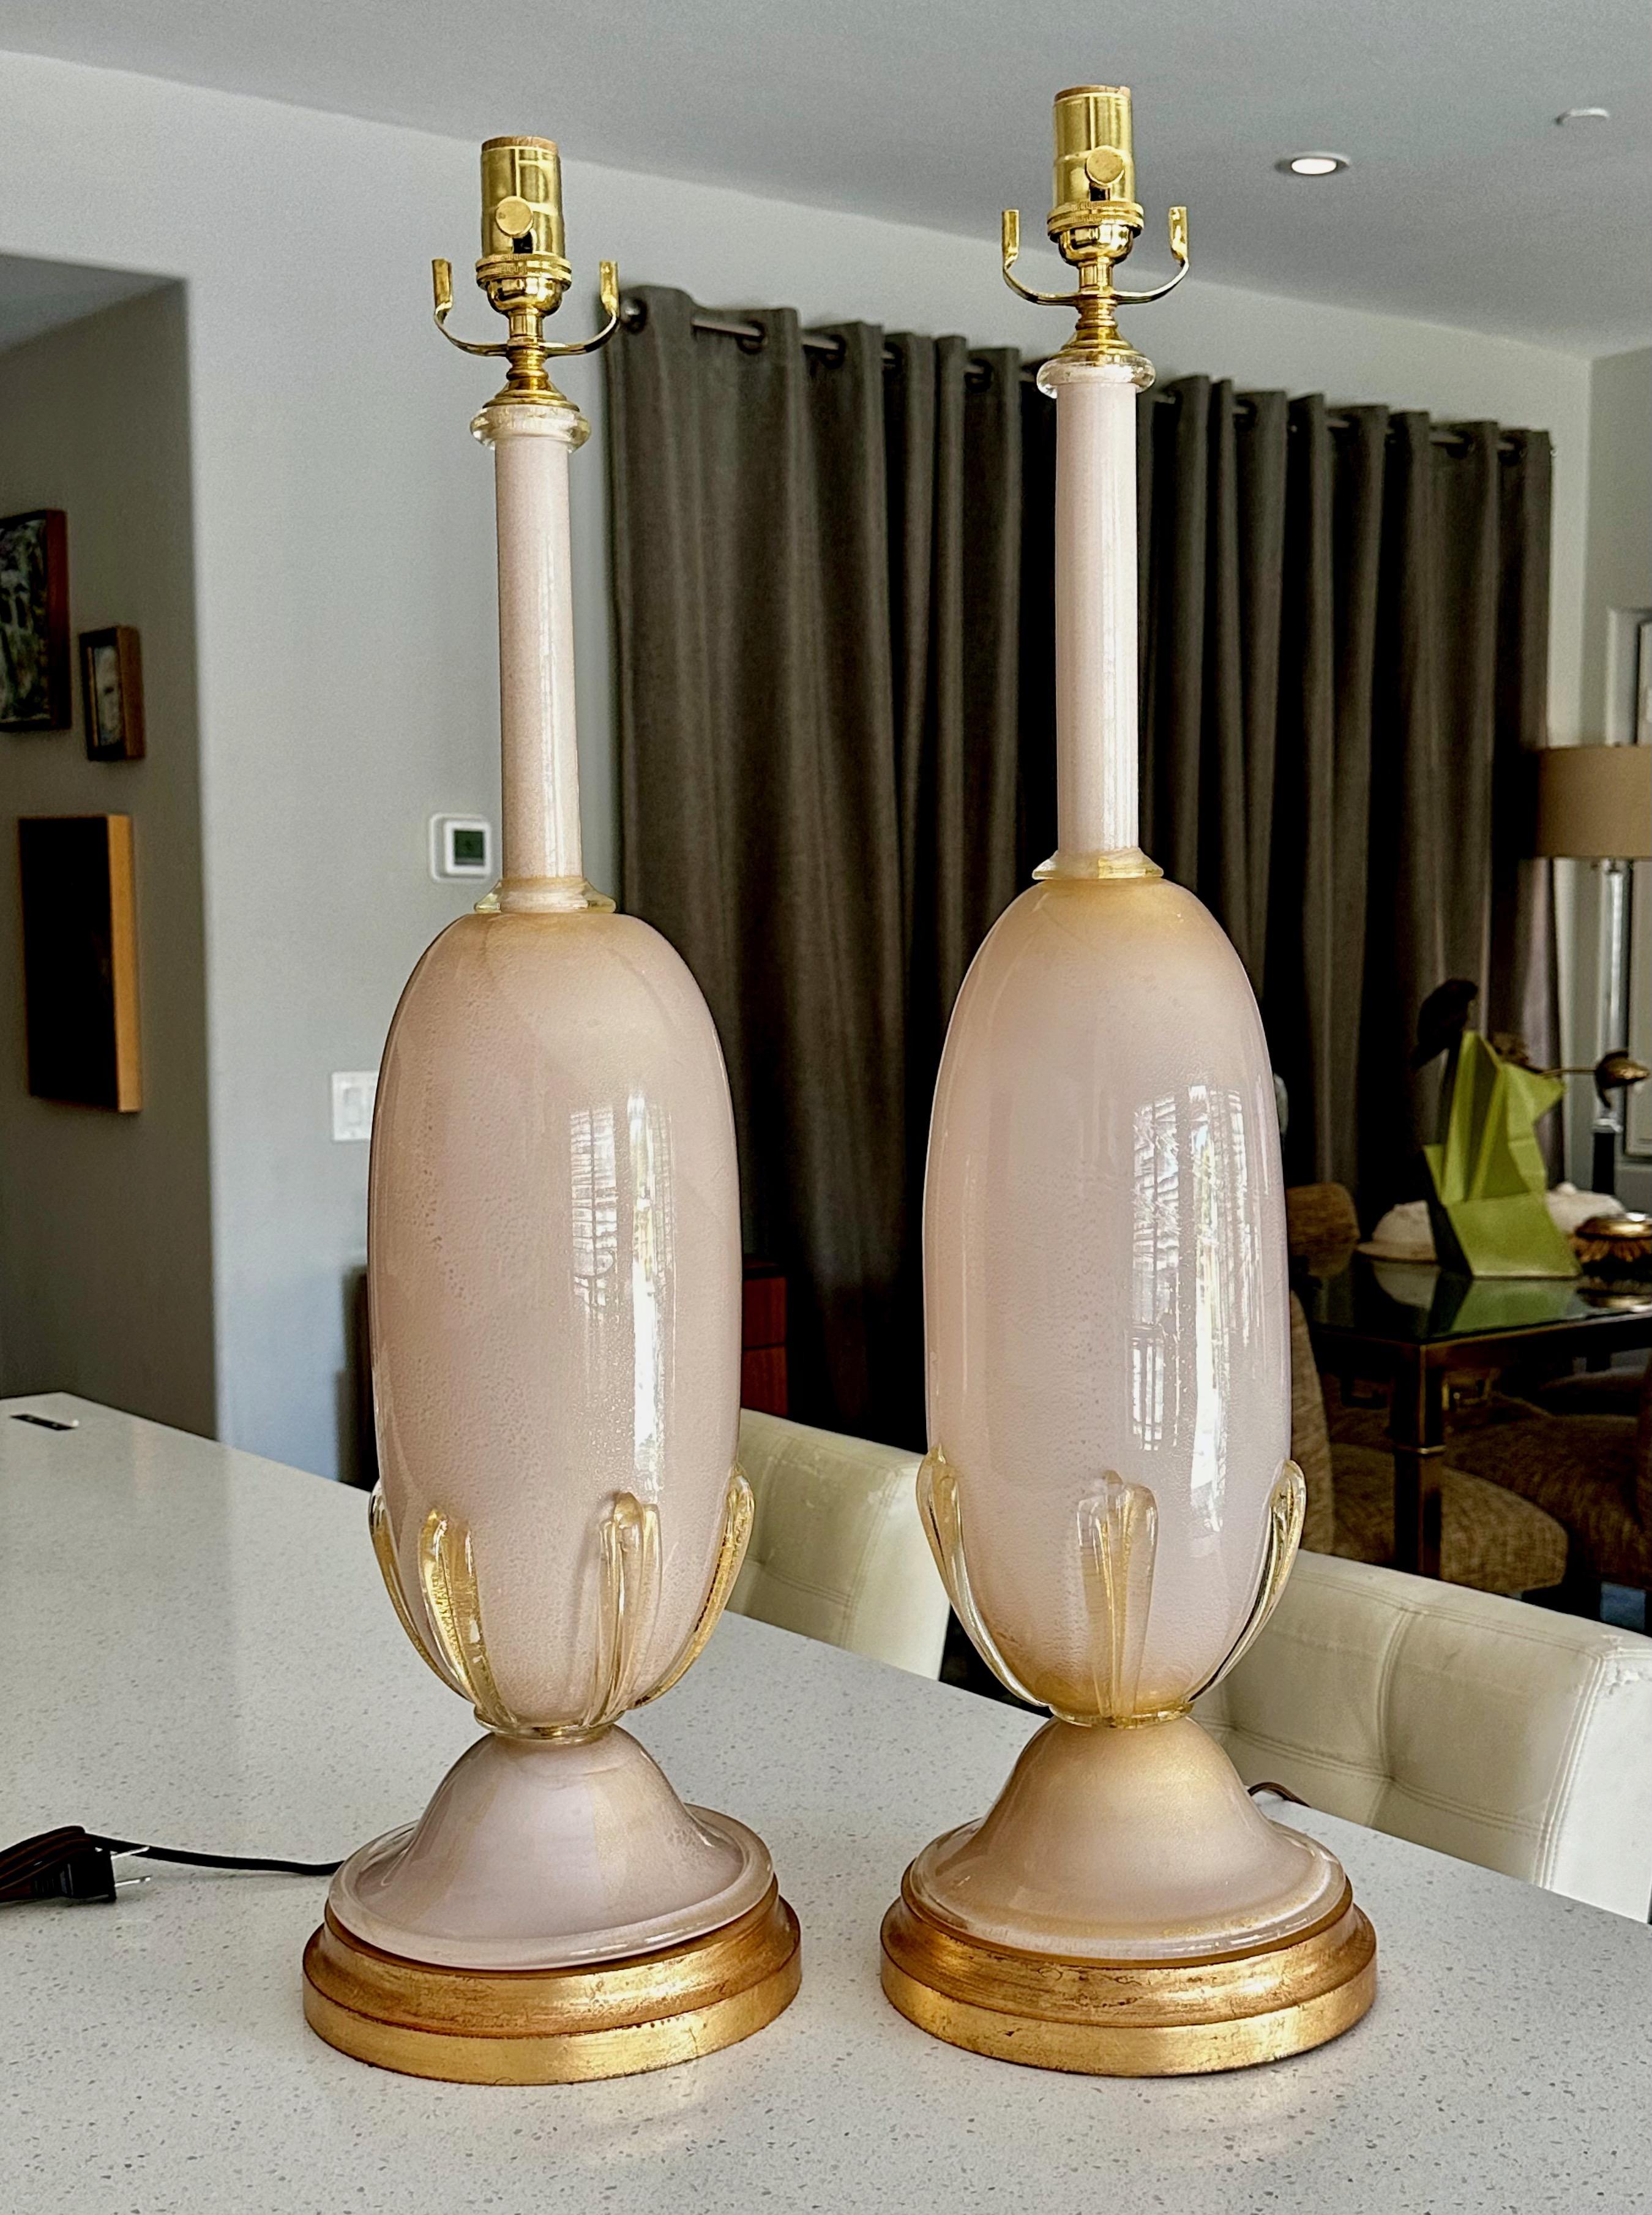 Pair large scale Murano Italian hand blown pink or salmon glass table lamps with gold inclusions. The hand blown glass bodies rest on giltwood bases. Attributed to Barovier & Toso. Rewired with new three-way brass sockets and cords. Overall height